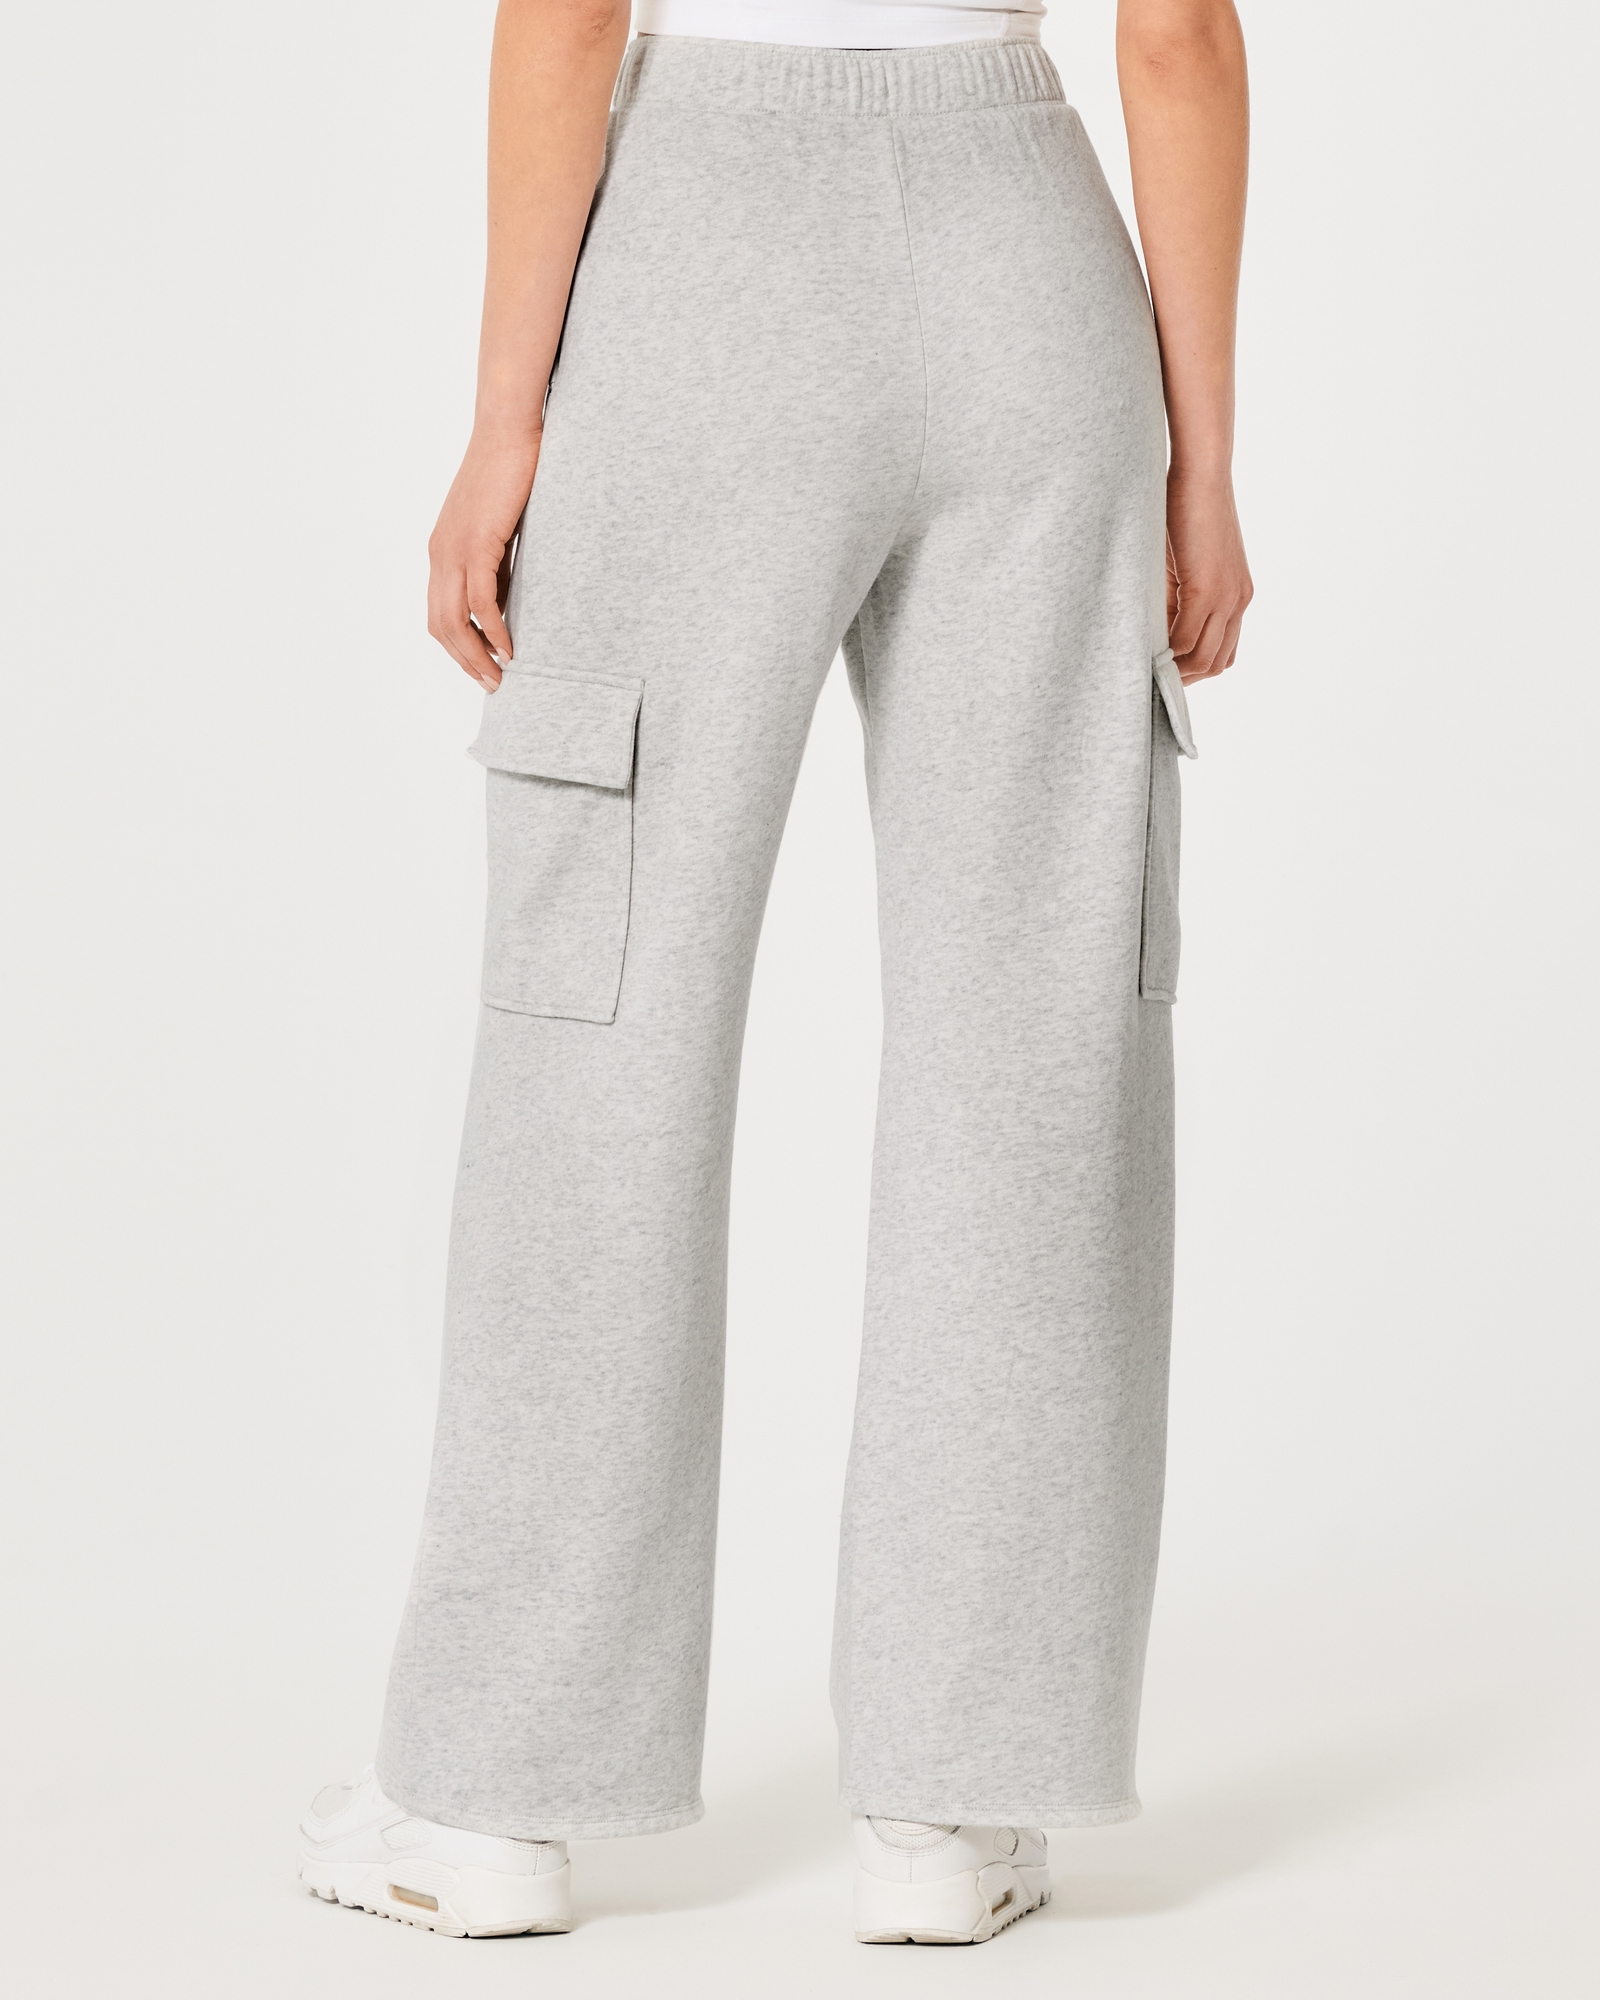 Women's Gilly Hicks Active Wide-Leg Cargo Sweatpants - Hollister Co.